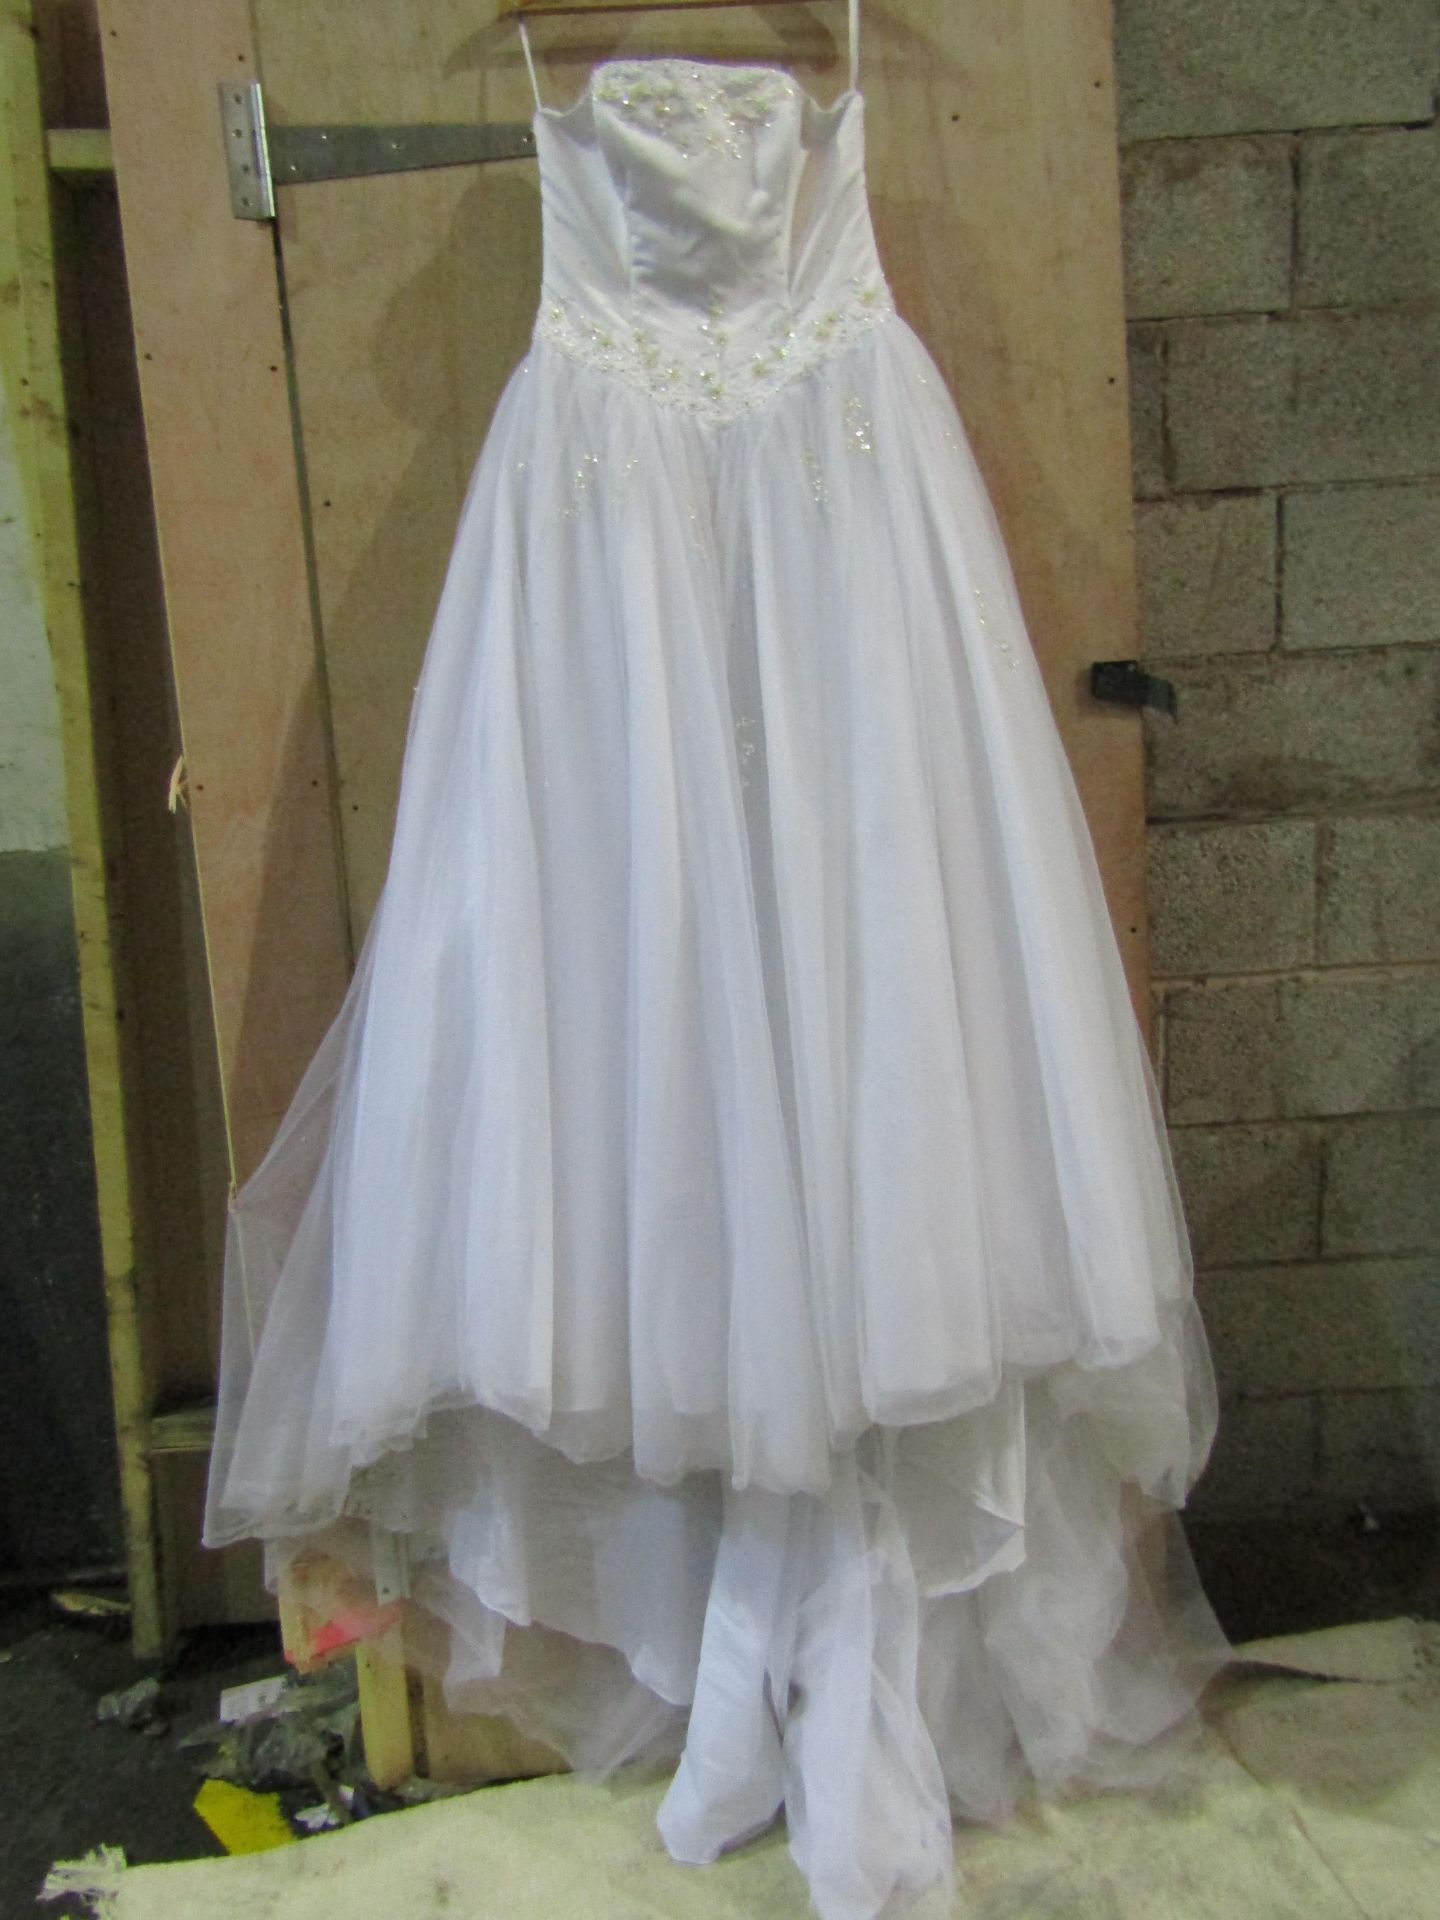 Approx 500 pieces of wedding shop stock to include wedding dresses, mother of the bride, dresses, - Image 91 of 108